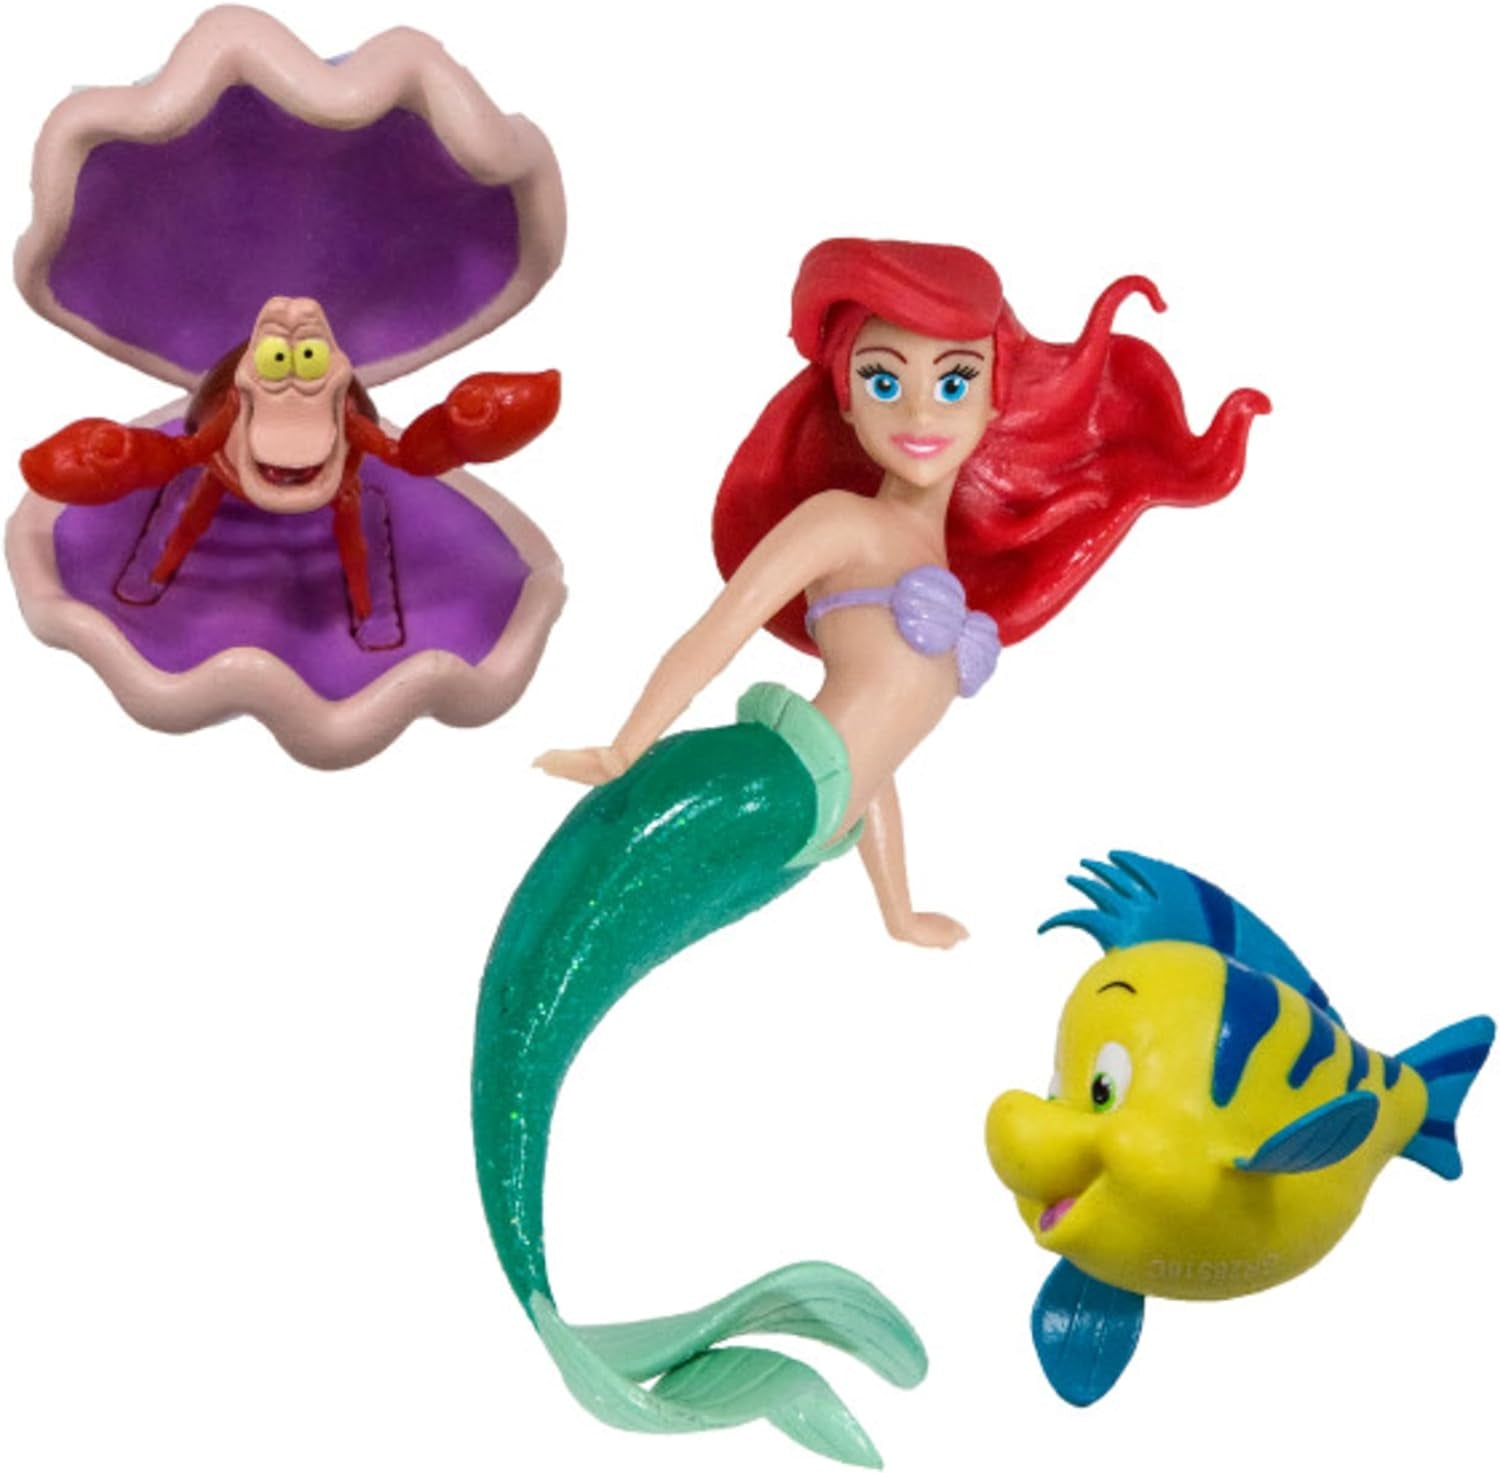 Little Mermaid Disney Dive Characters Kids Pool Toy- Princess Ariel, Flounder, and Sebastian, Bath Toys and Pool Party Supplies